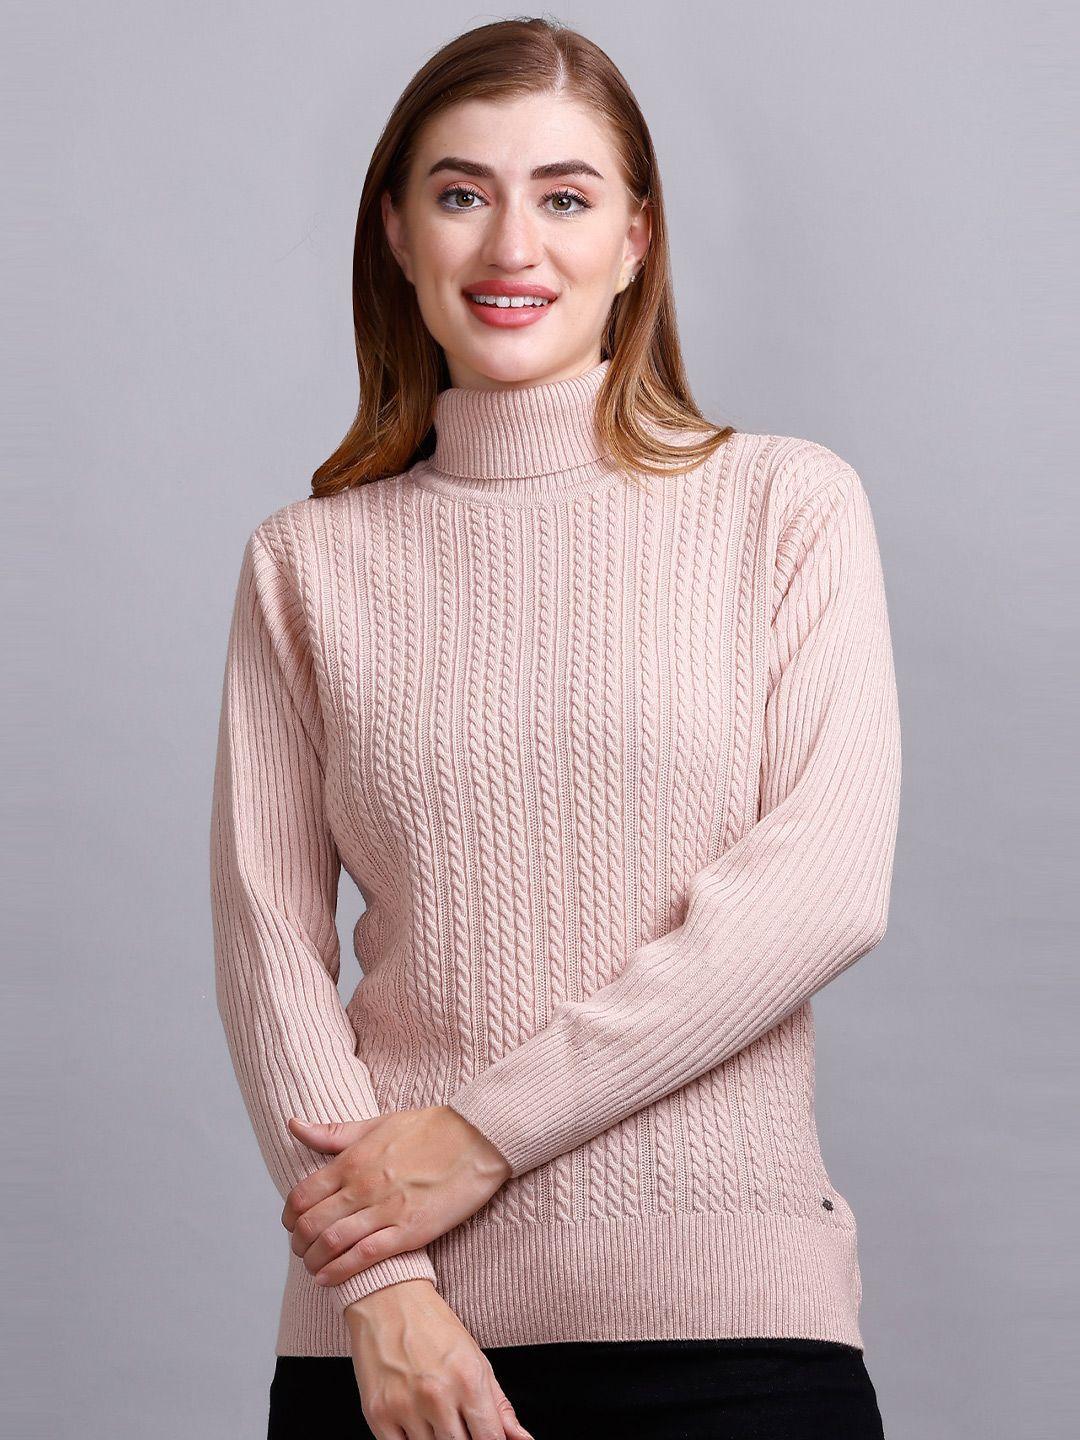 godfrey cable knit turtle neck woollen pullover sweater